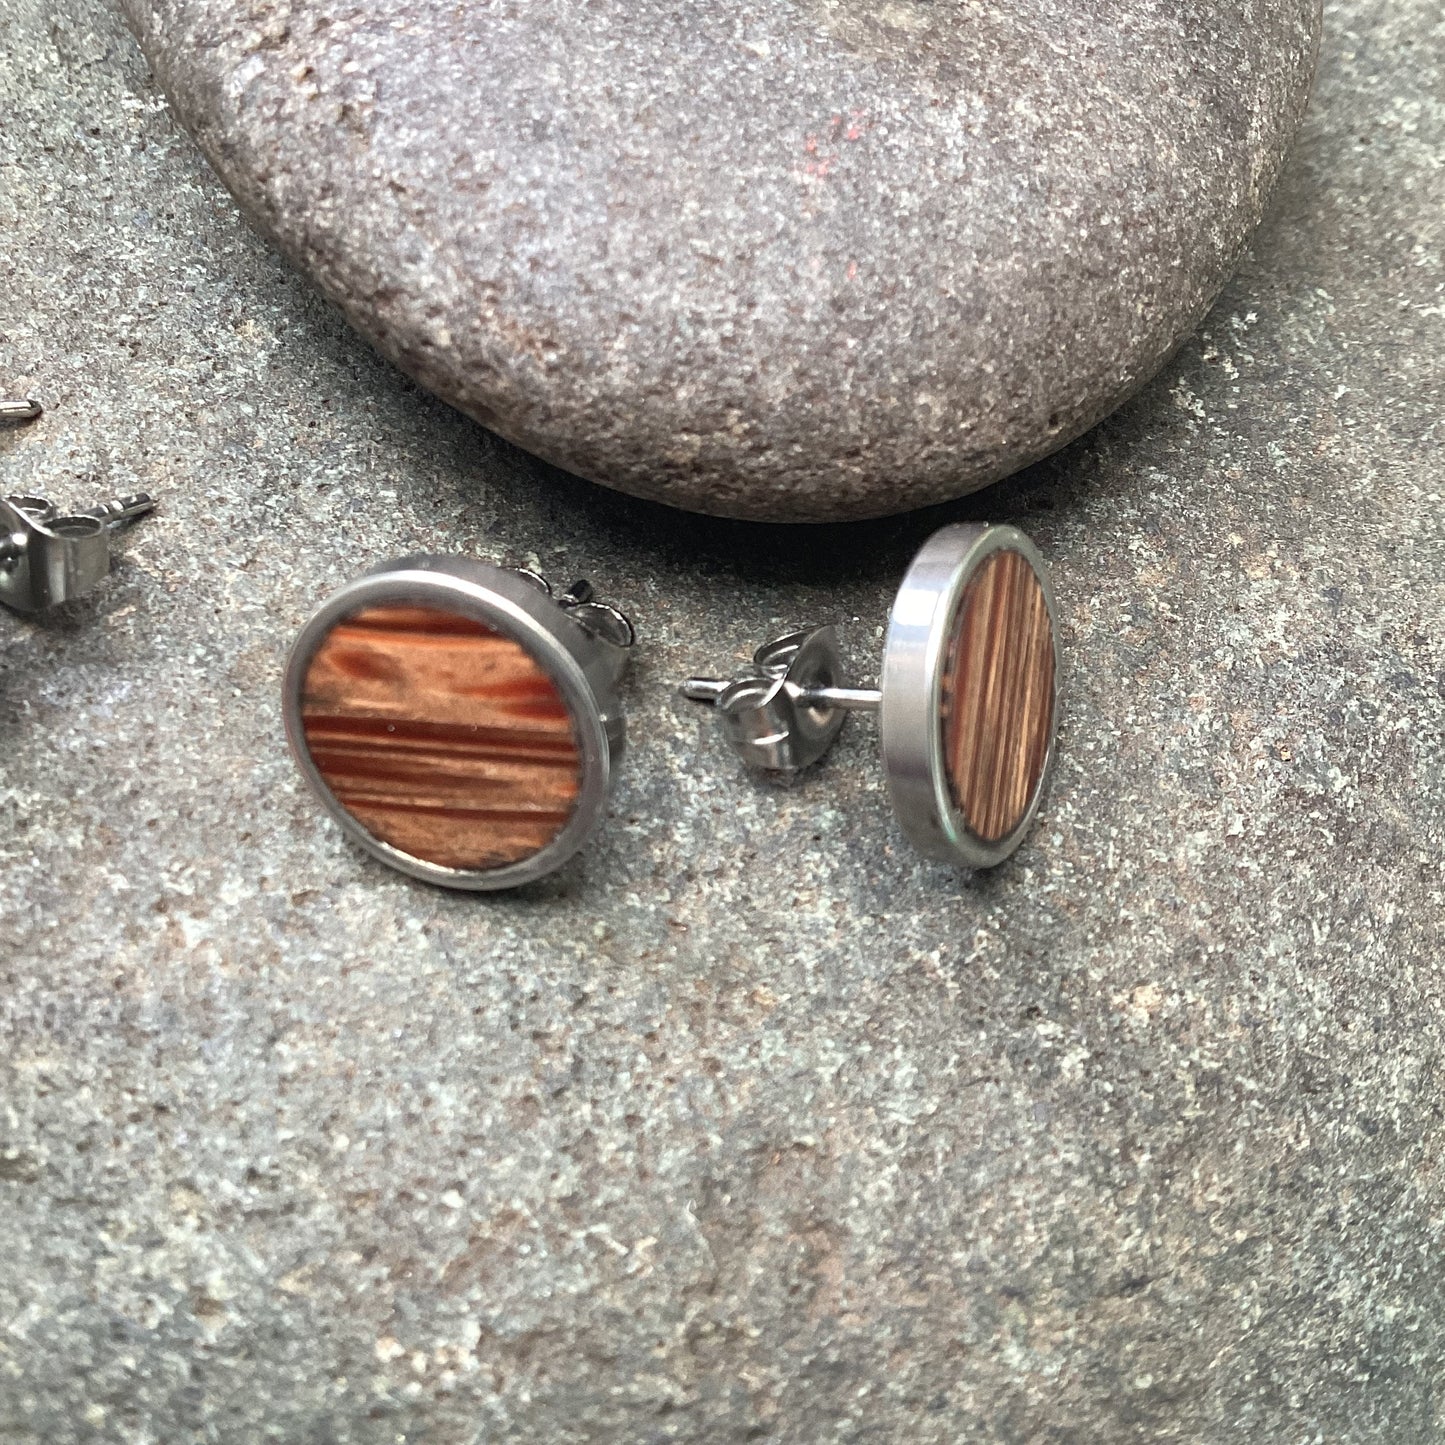 Stripped Coconut wood and stainless steel round stud earrings.